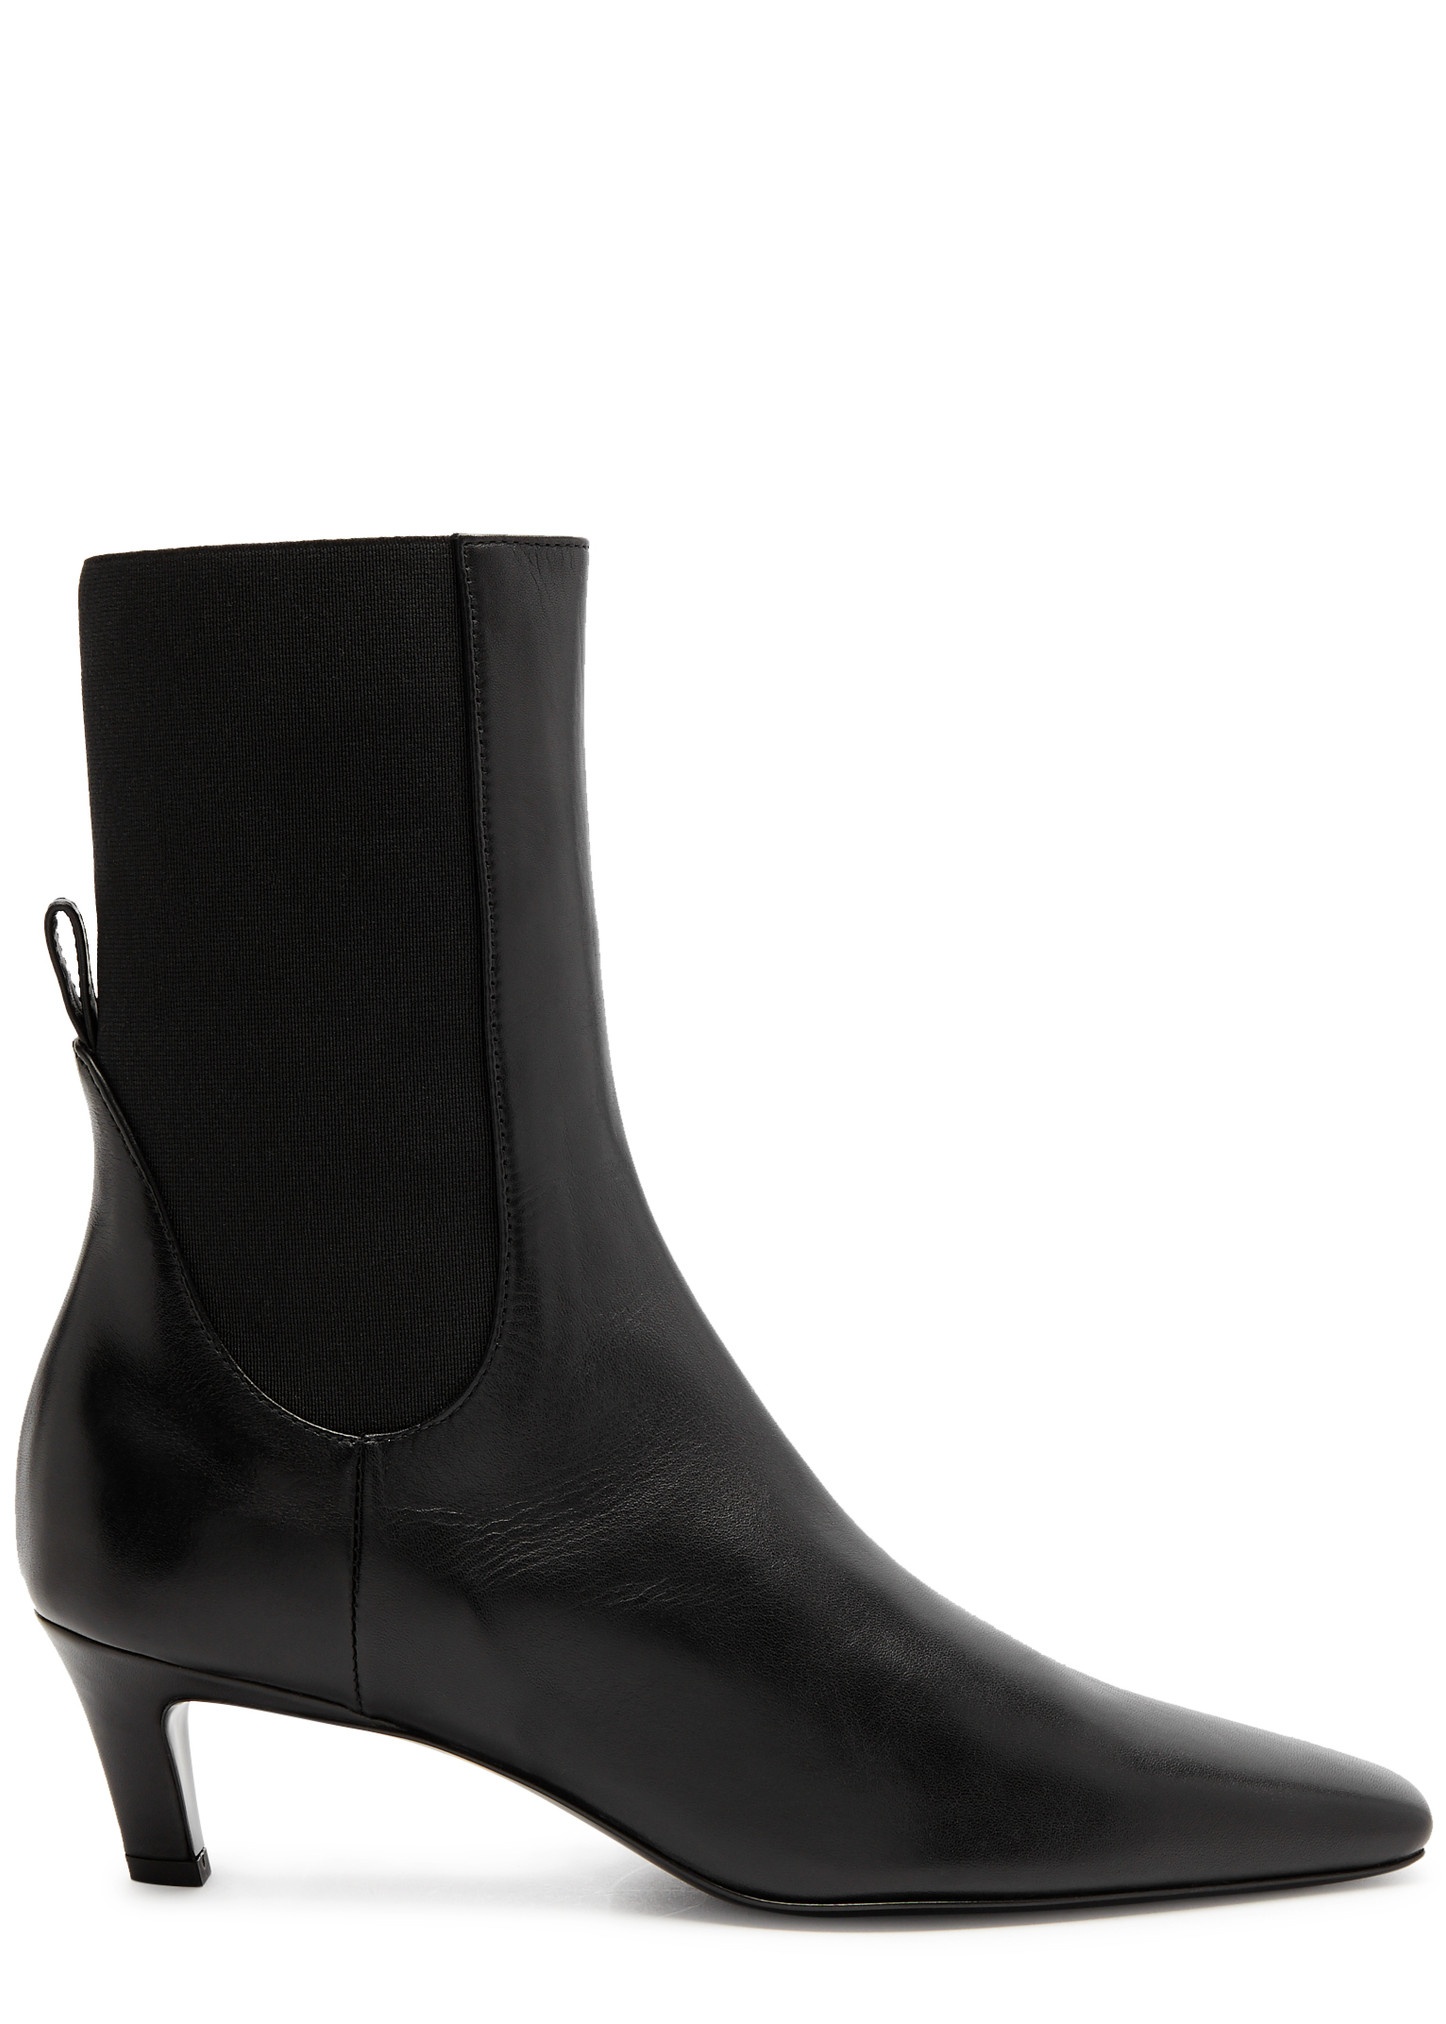 50 leather ankle boots - 1